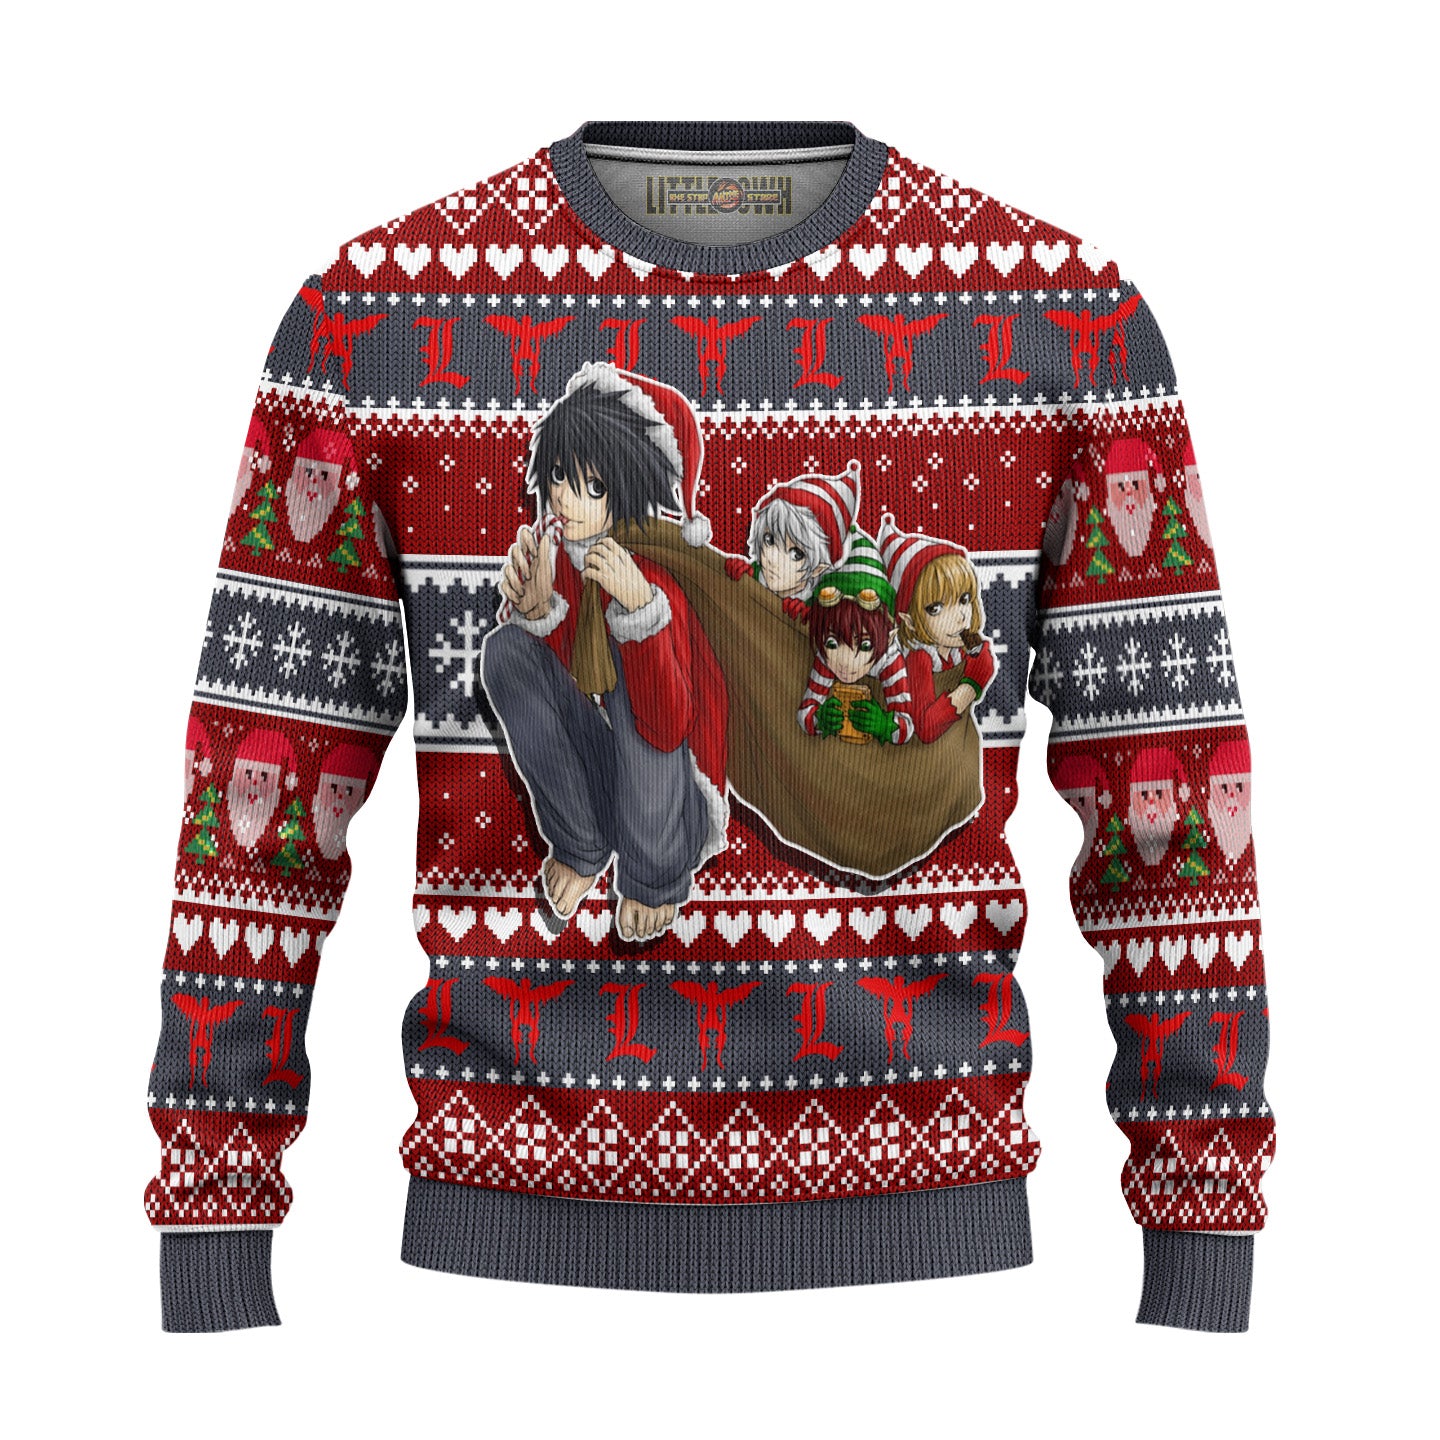 Death Note Anime Ugly Christmas Sweater Custom New Design